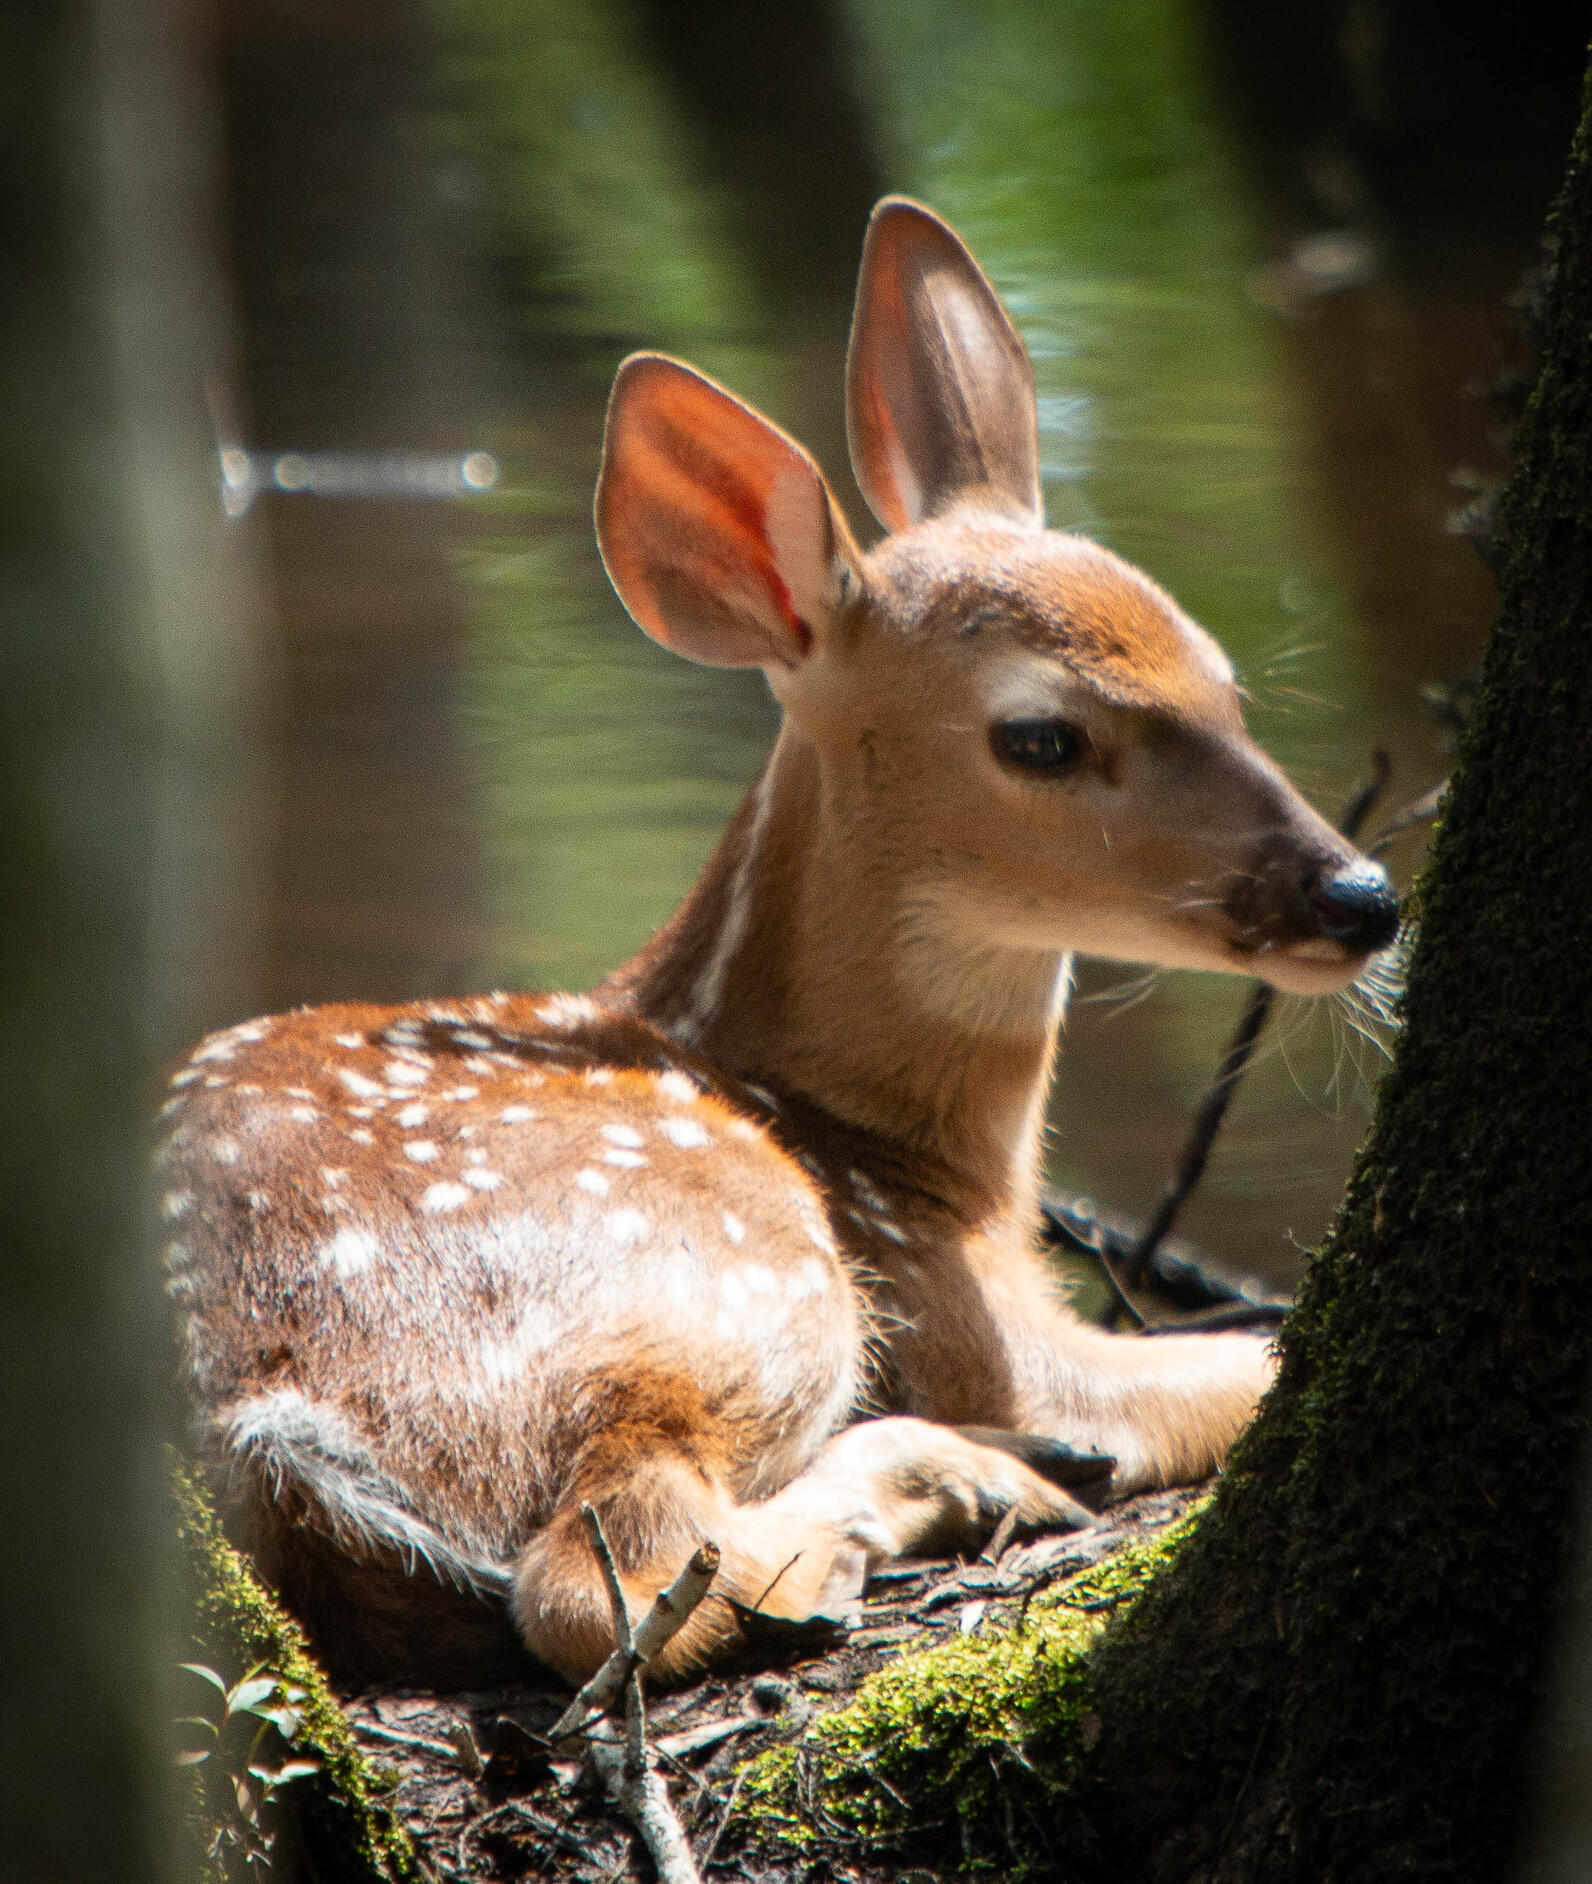 A fawn sits on the edge of the water, warmed by the sun. Its ears are raised. For this photo about hope, David has written the words, "Hope is tangible in a new life. Hope desires deeply, but gently."Hop